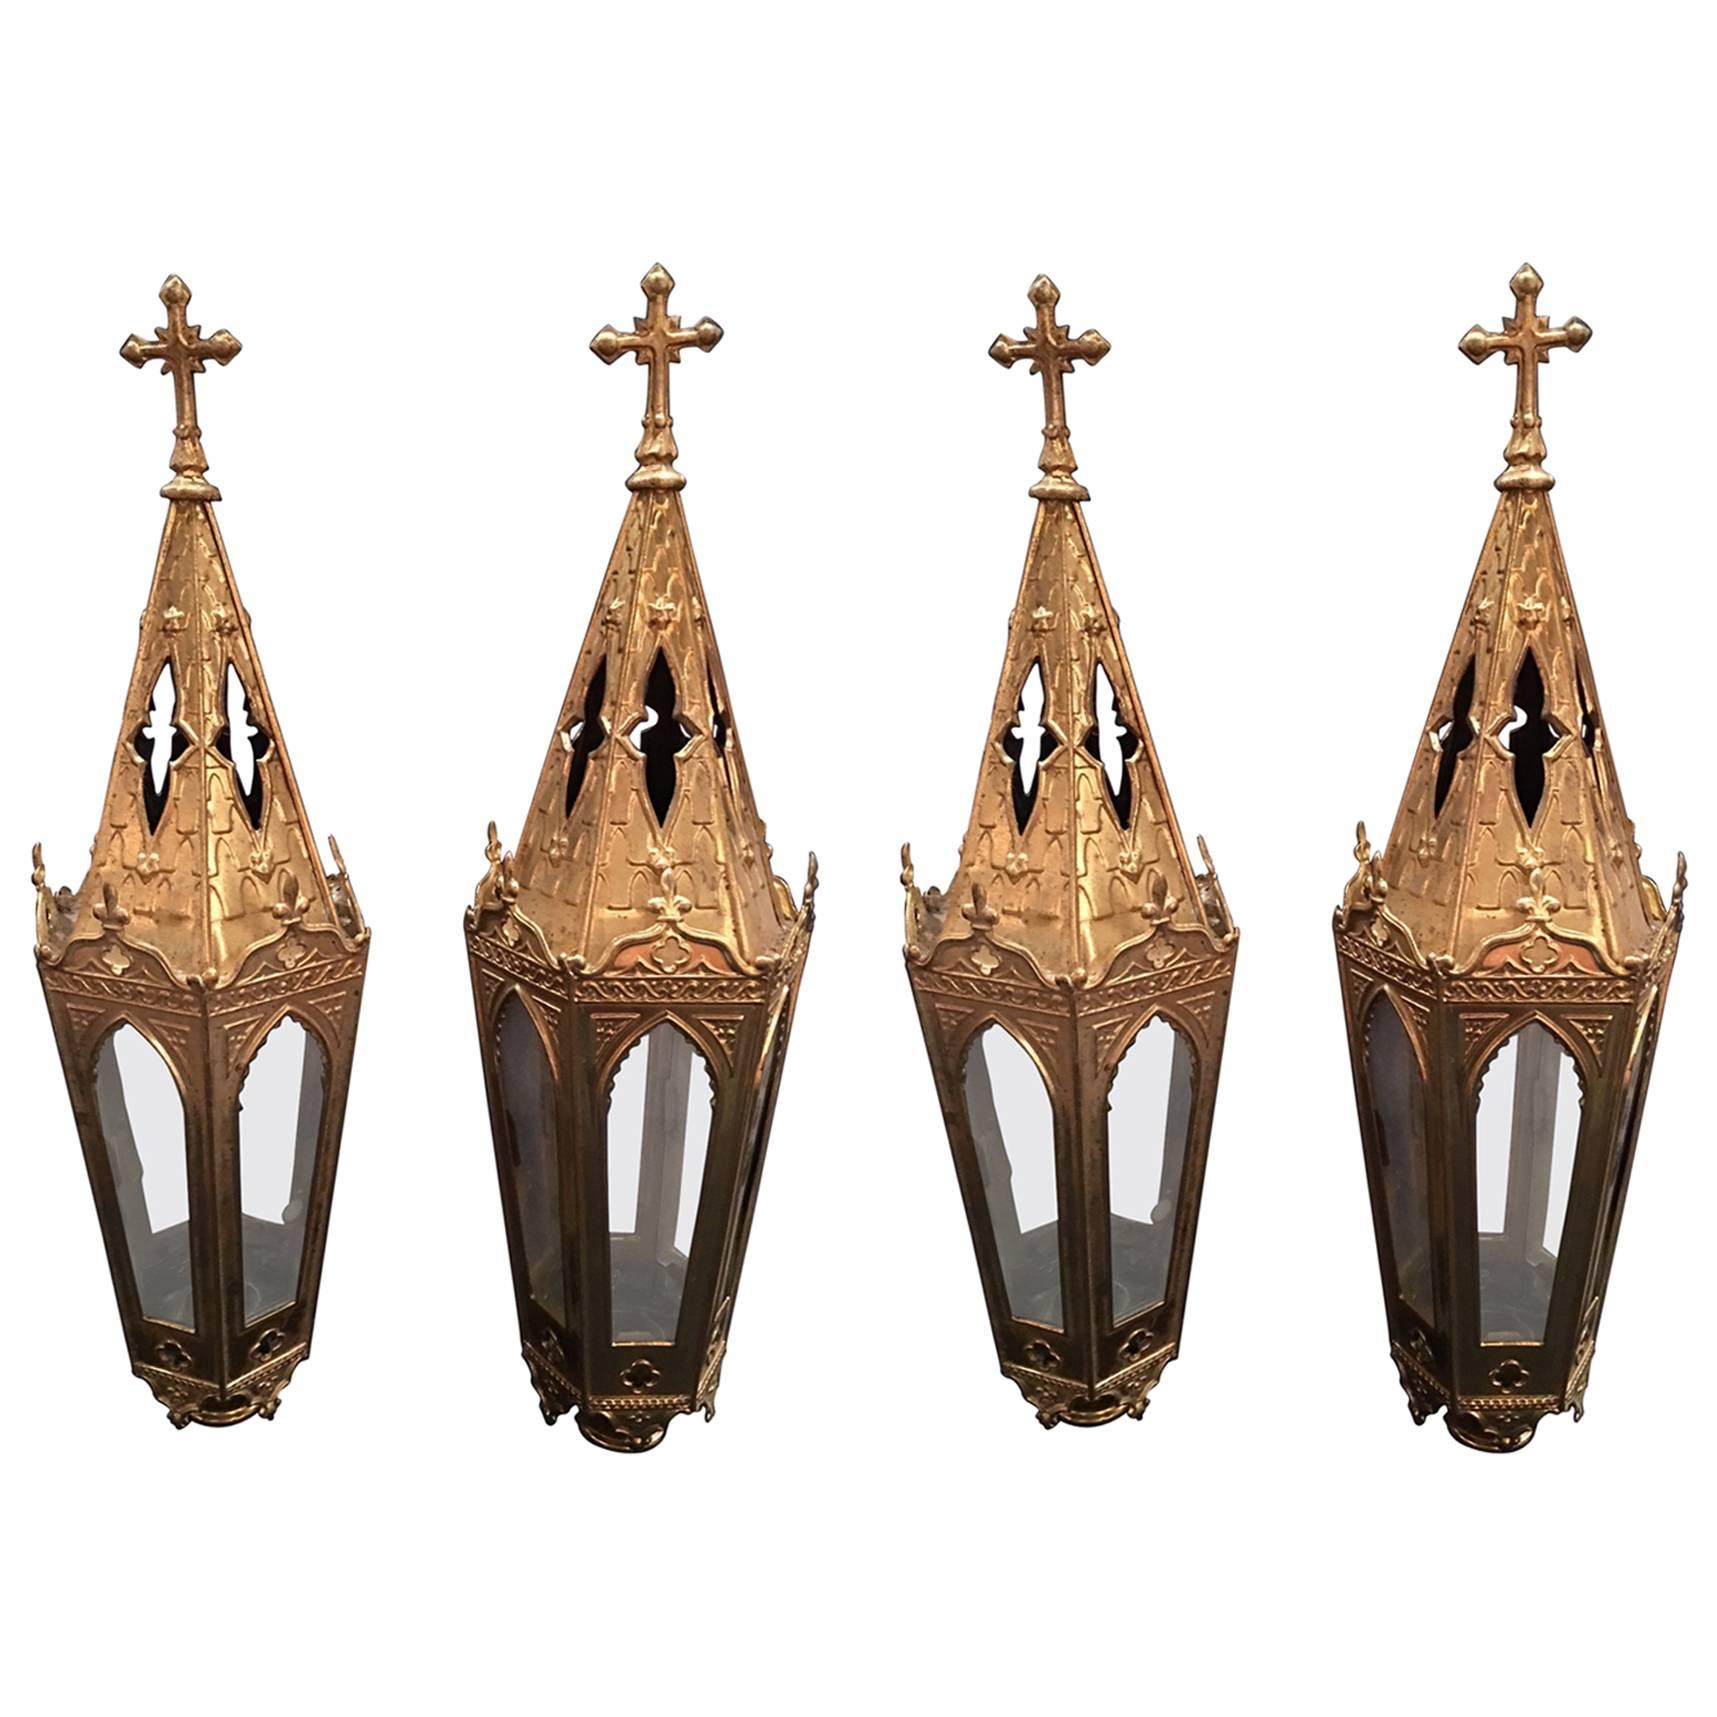 French Set of Four Polished Brass Pole Lanterns or Candlesticks, 19th Century